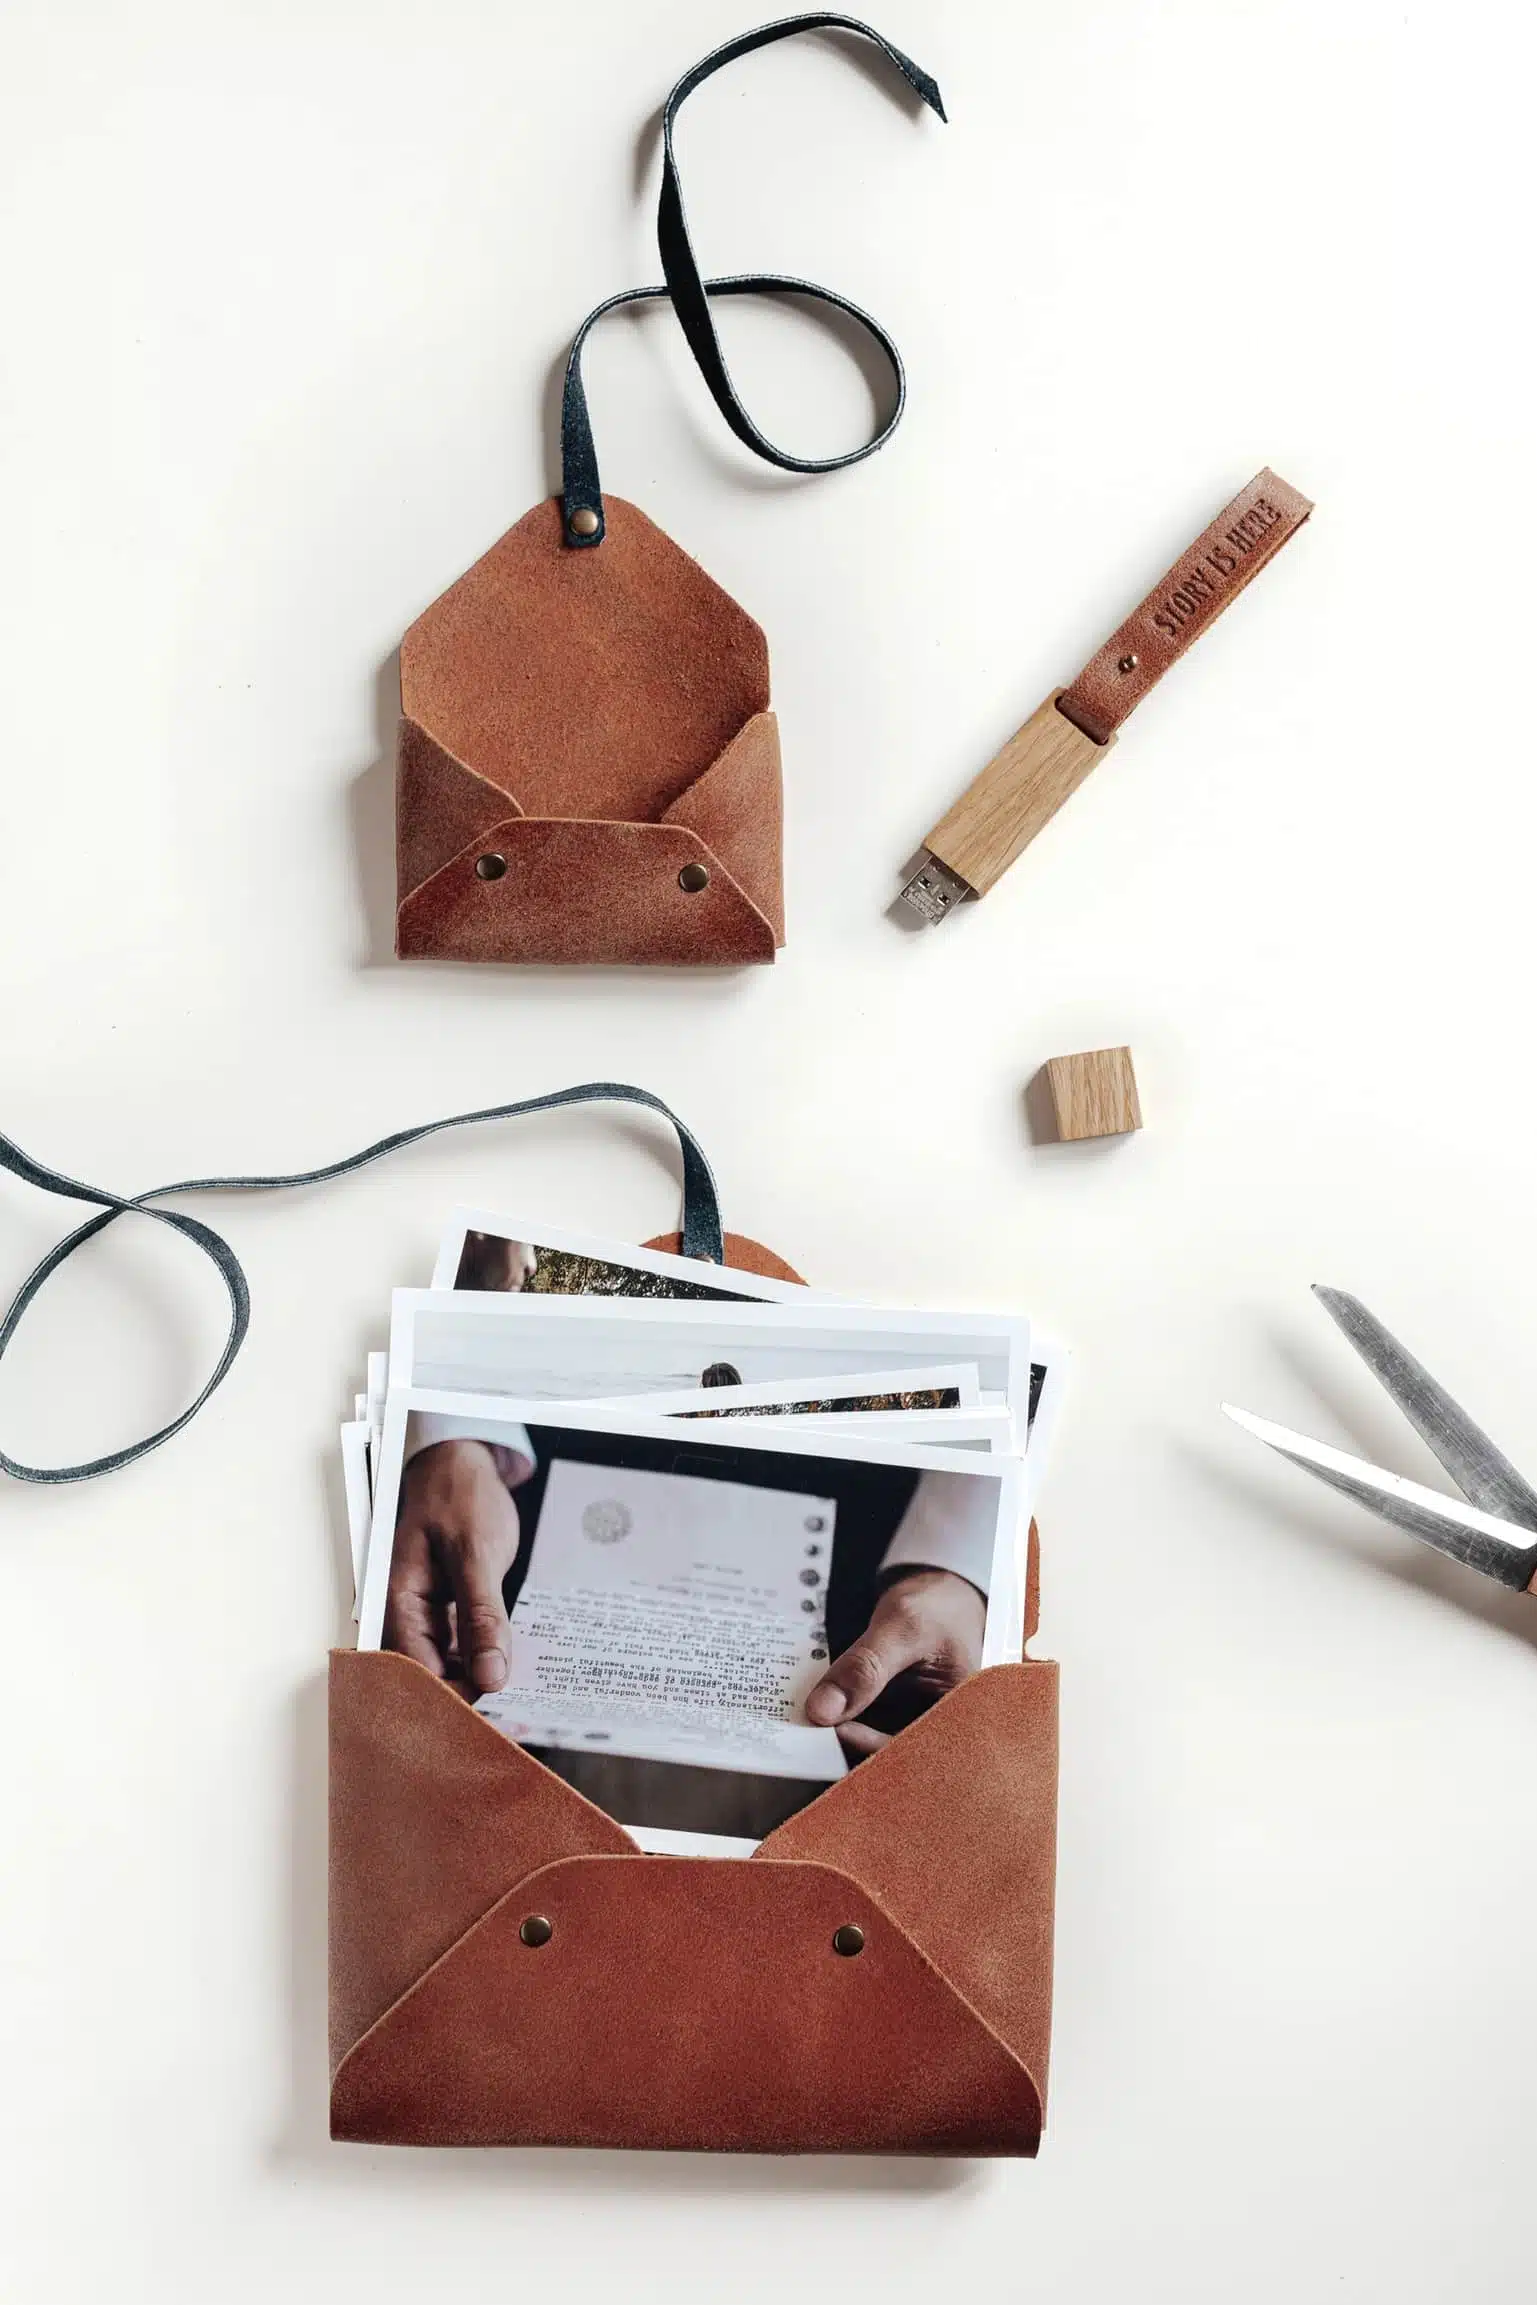 Wild Leather | button closing | size S | 10x15cm | 4×6″ | real leather envelope for prints | handmade photography pouch